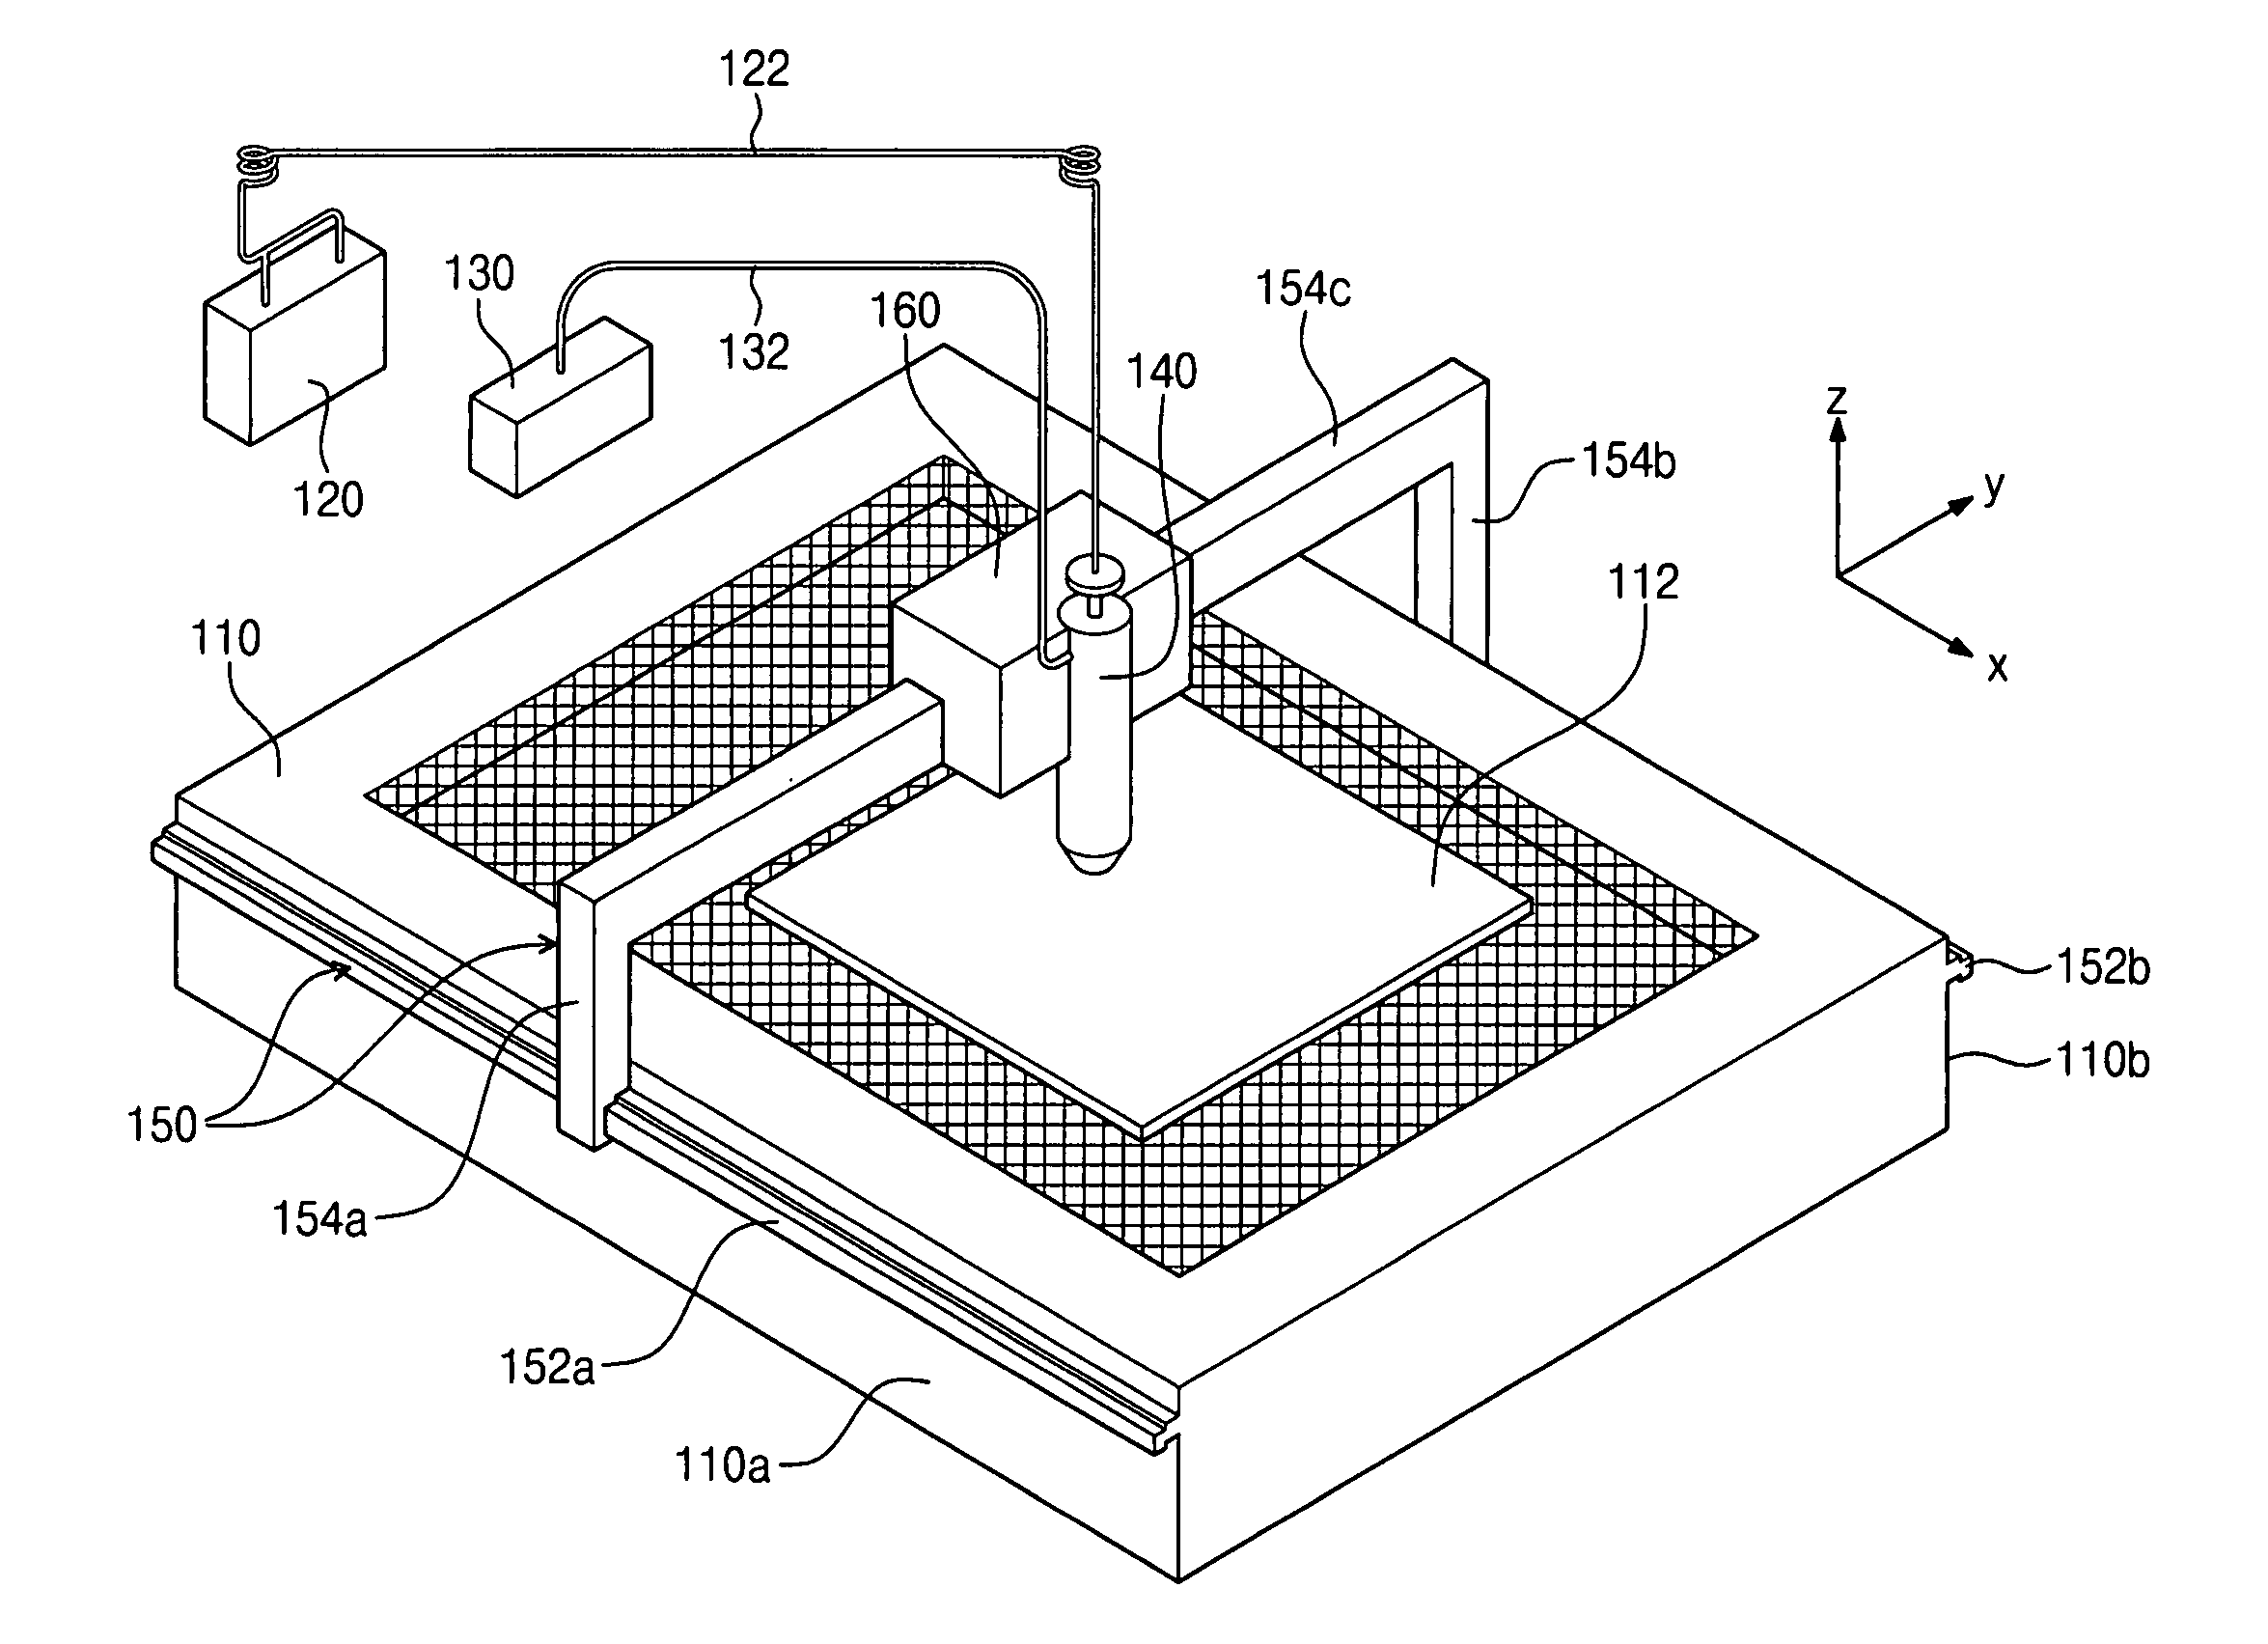 Substrate processing apparatus and method of operating the same